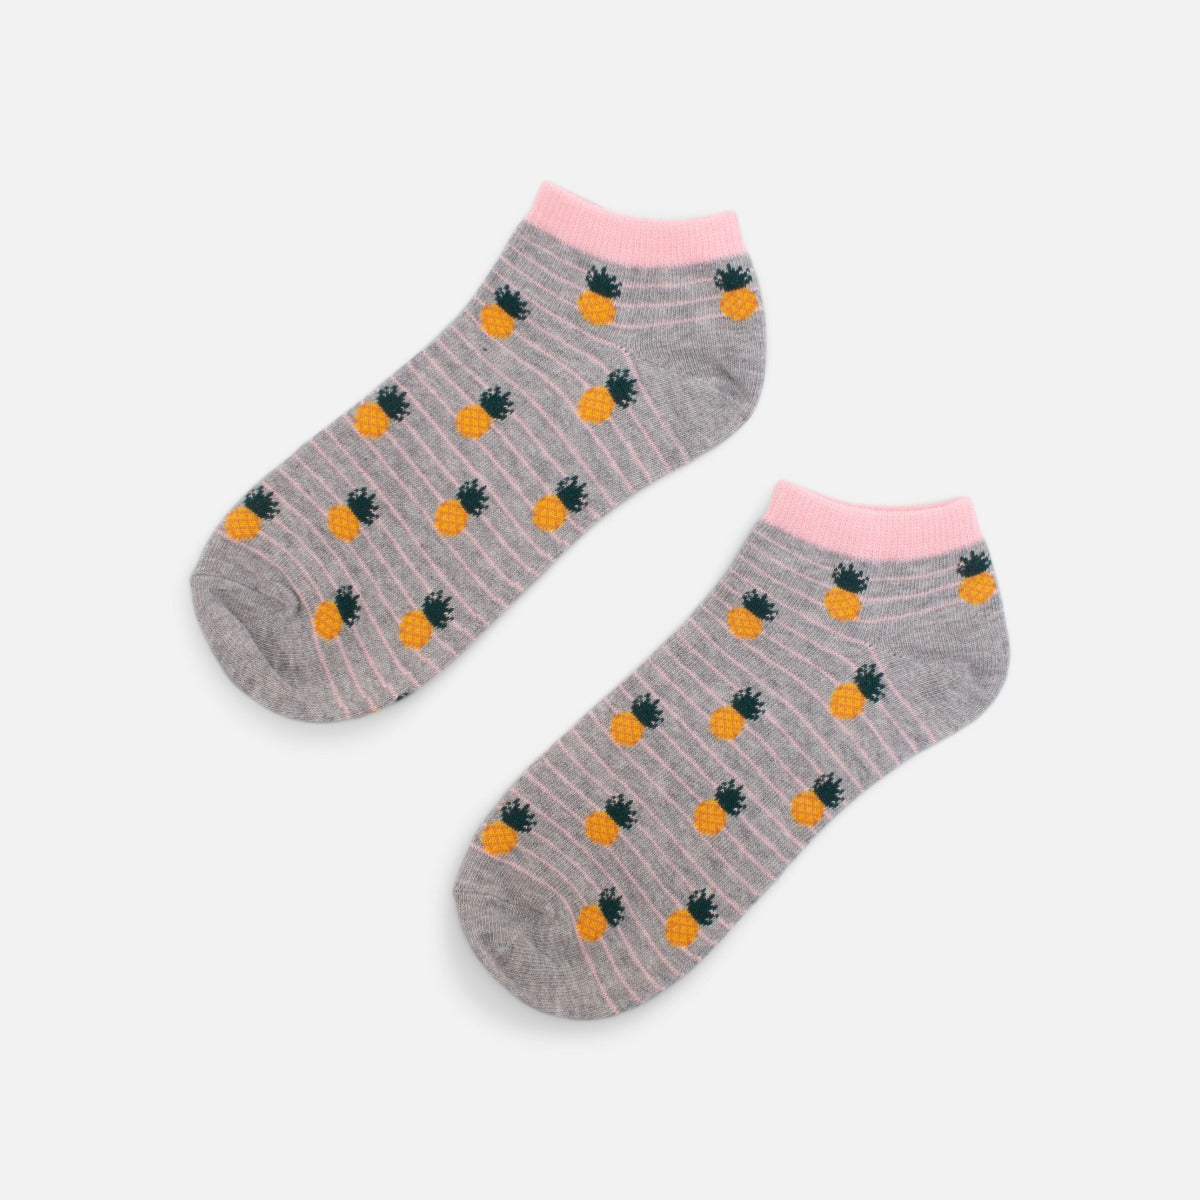 Grey ankle socks with stripes and pineapple